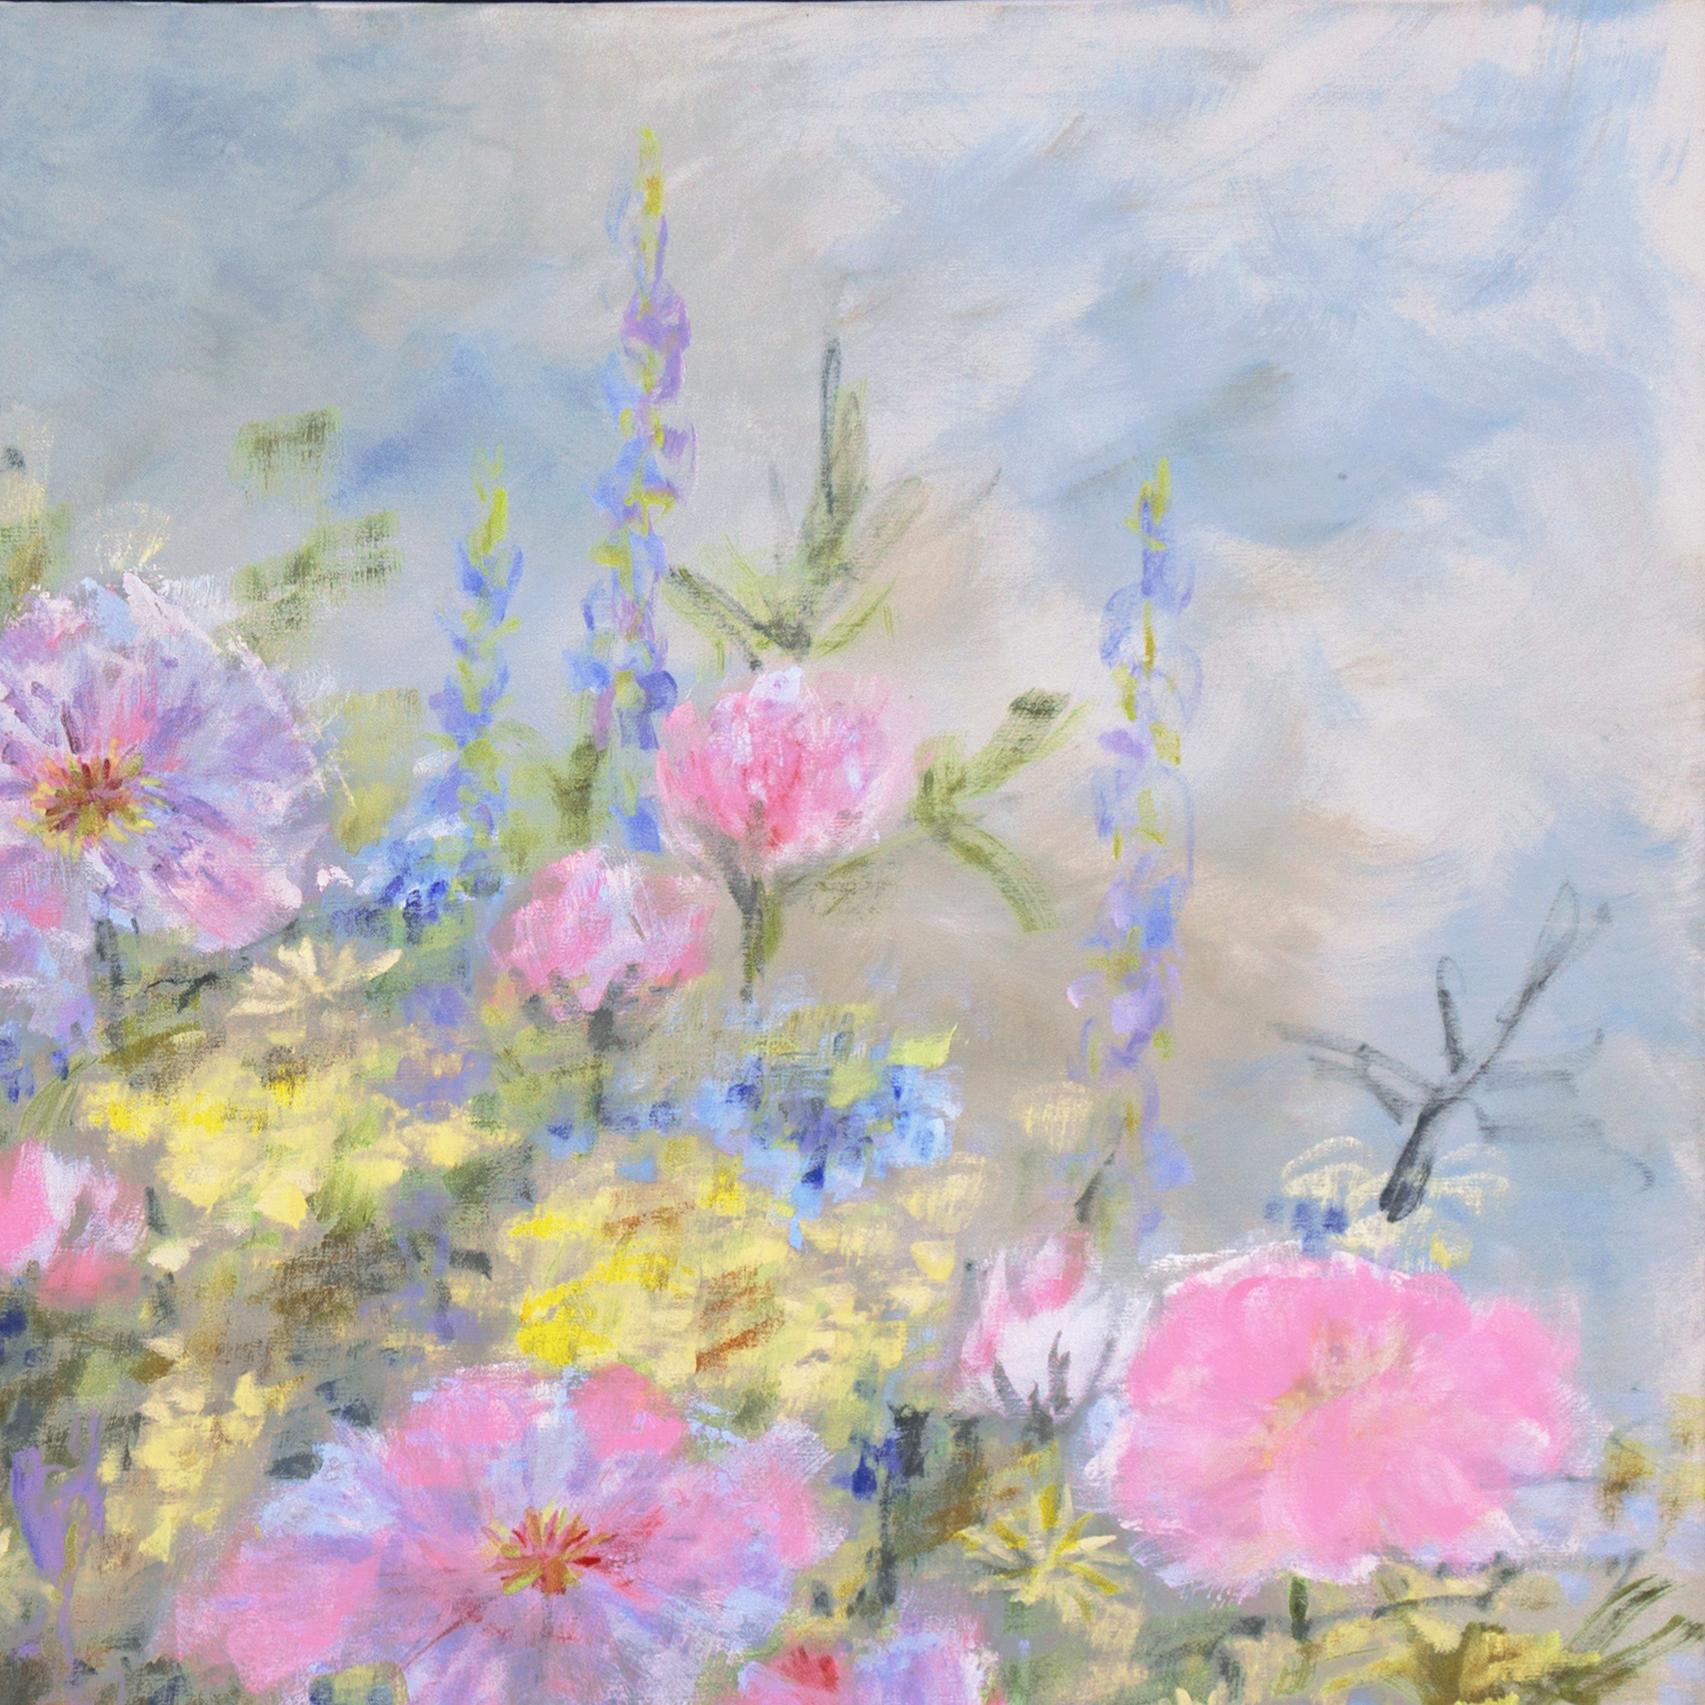 'Summer's Day, Wildflowers in the Breeze', American Impressionist Landscape Oil - Post-Impressionist Painting by R. Bothwell